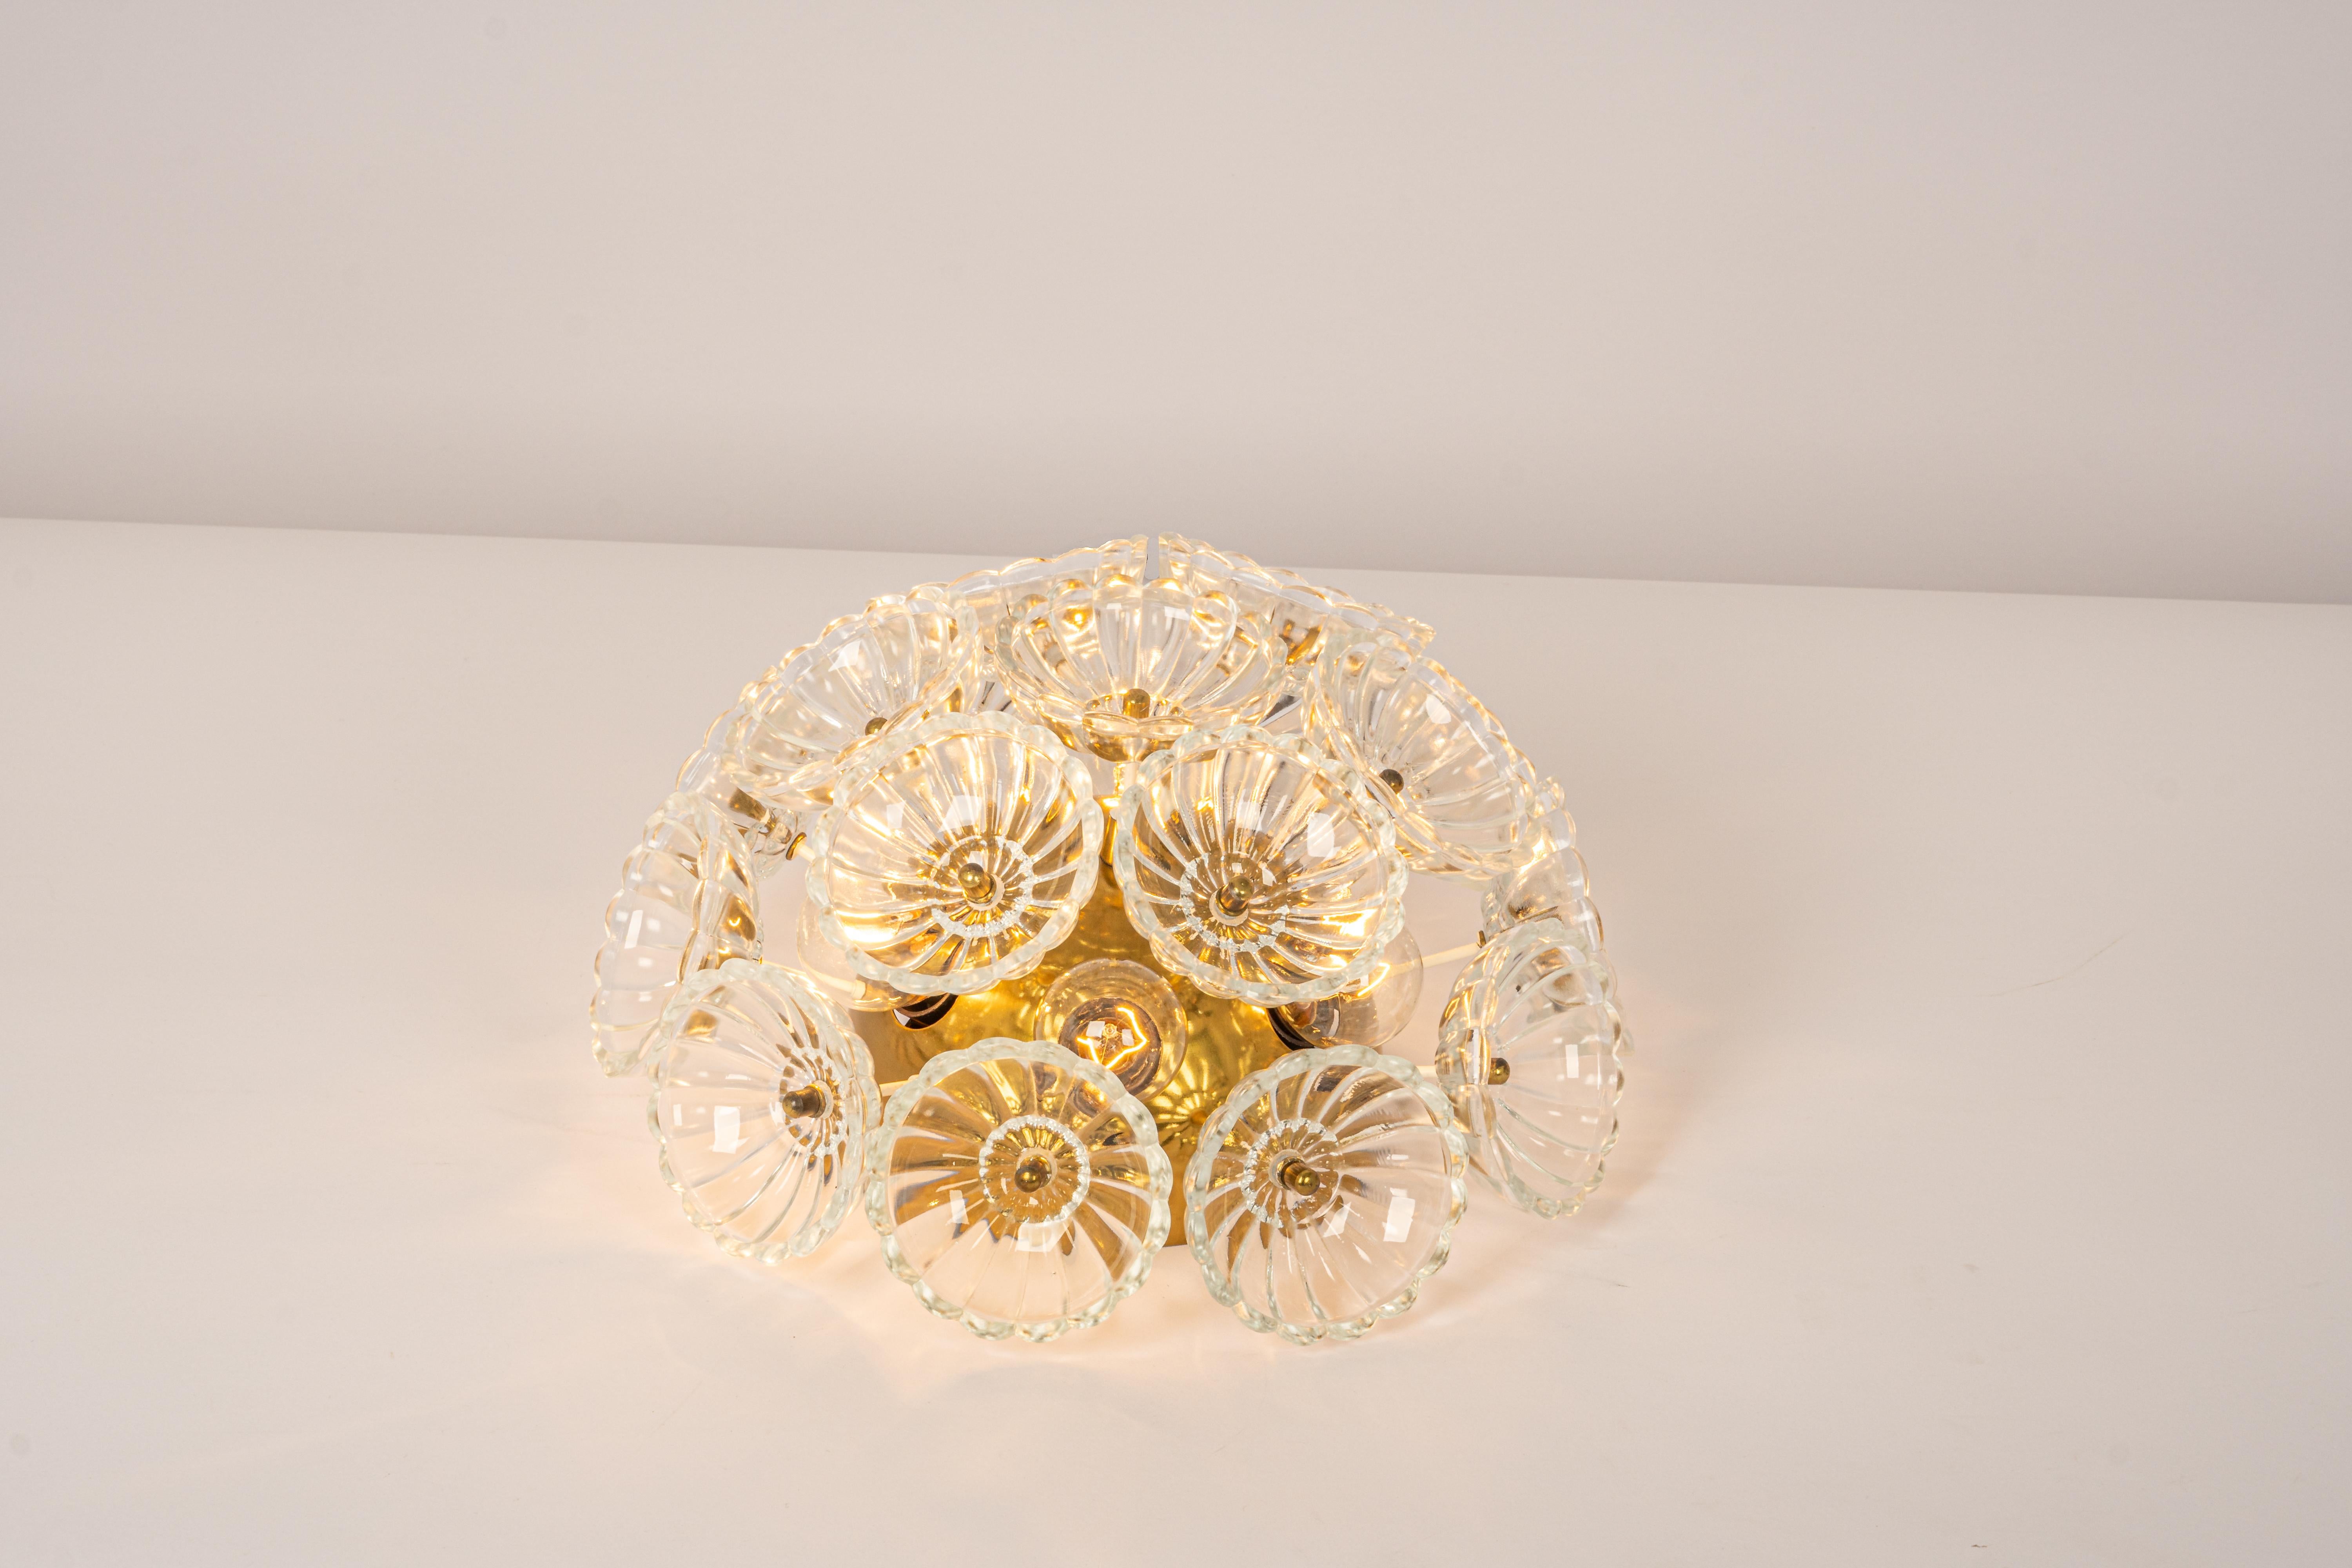 Stunning floral glass and brass Sputnik Flush mount, Germany, 1960s.
Good condition. Wonderful light effect.
It requires 6 x E14 standard bulbs with 40W max each.
Light bulbs are not included. It is possible to install this fixture in all